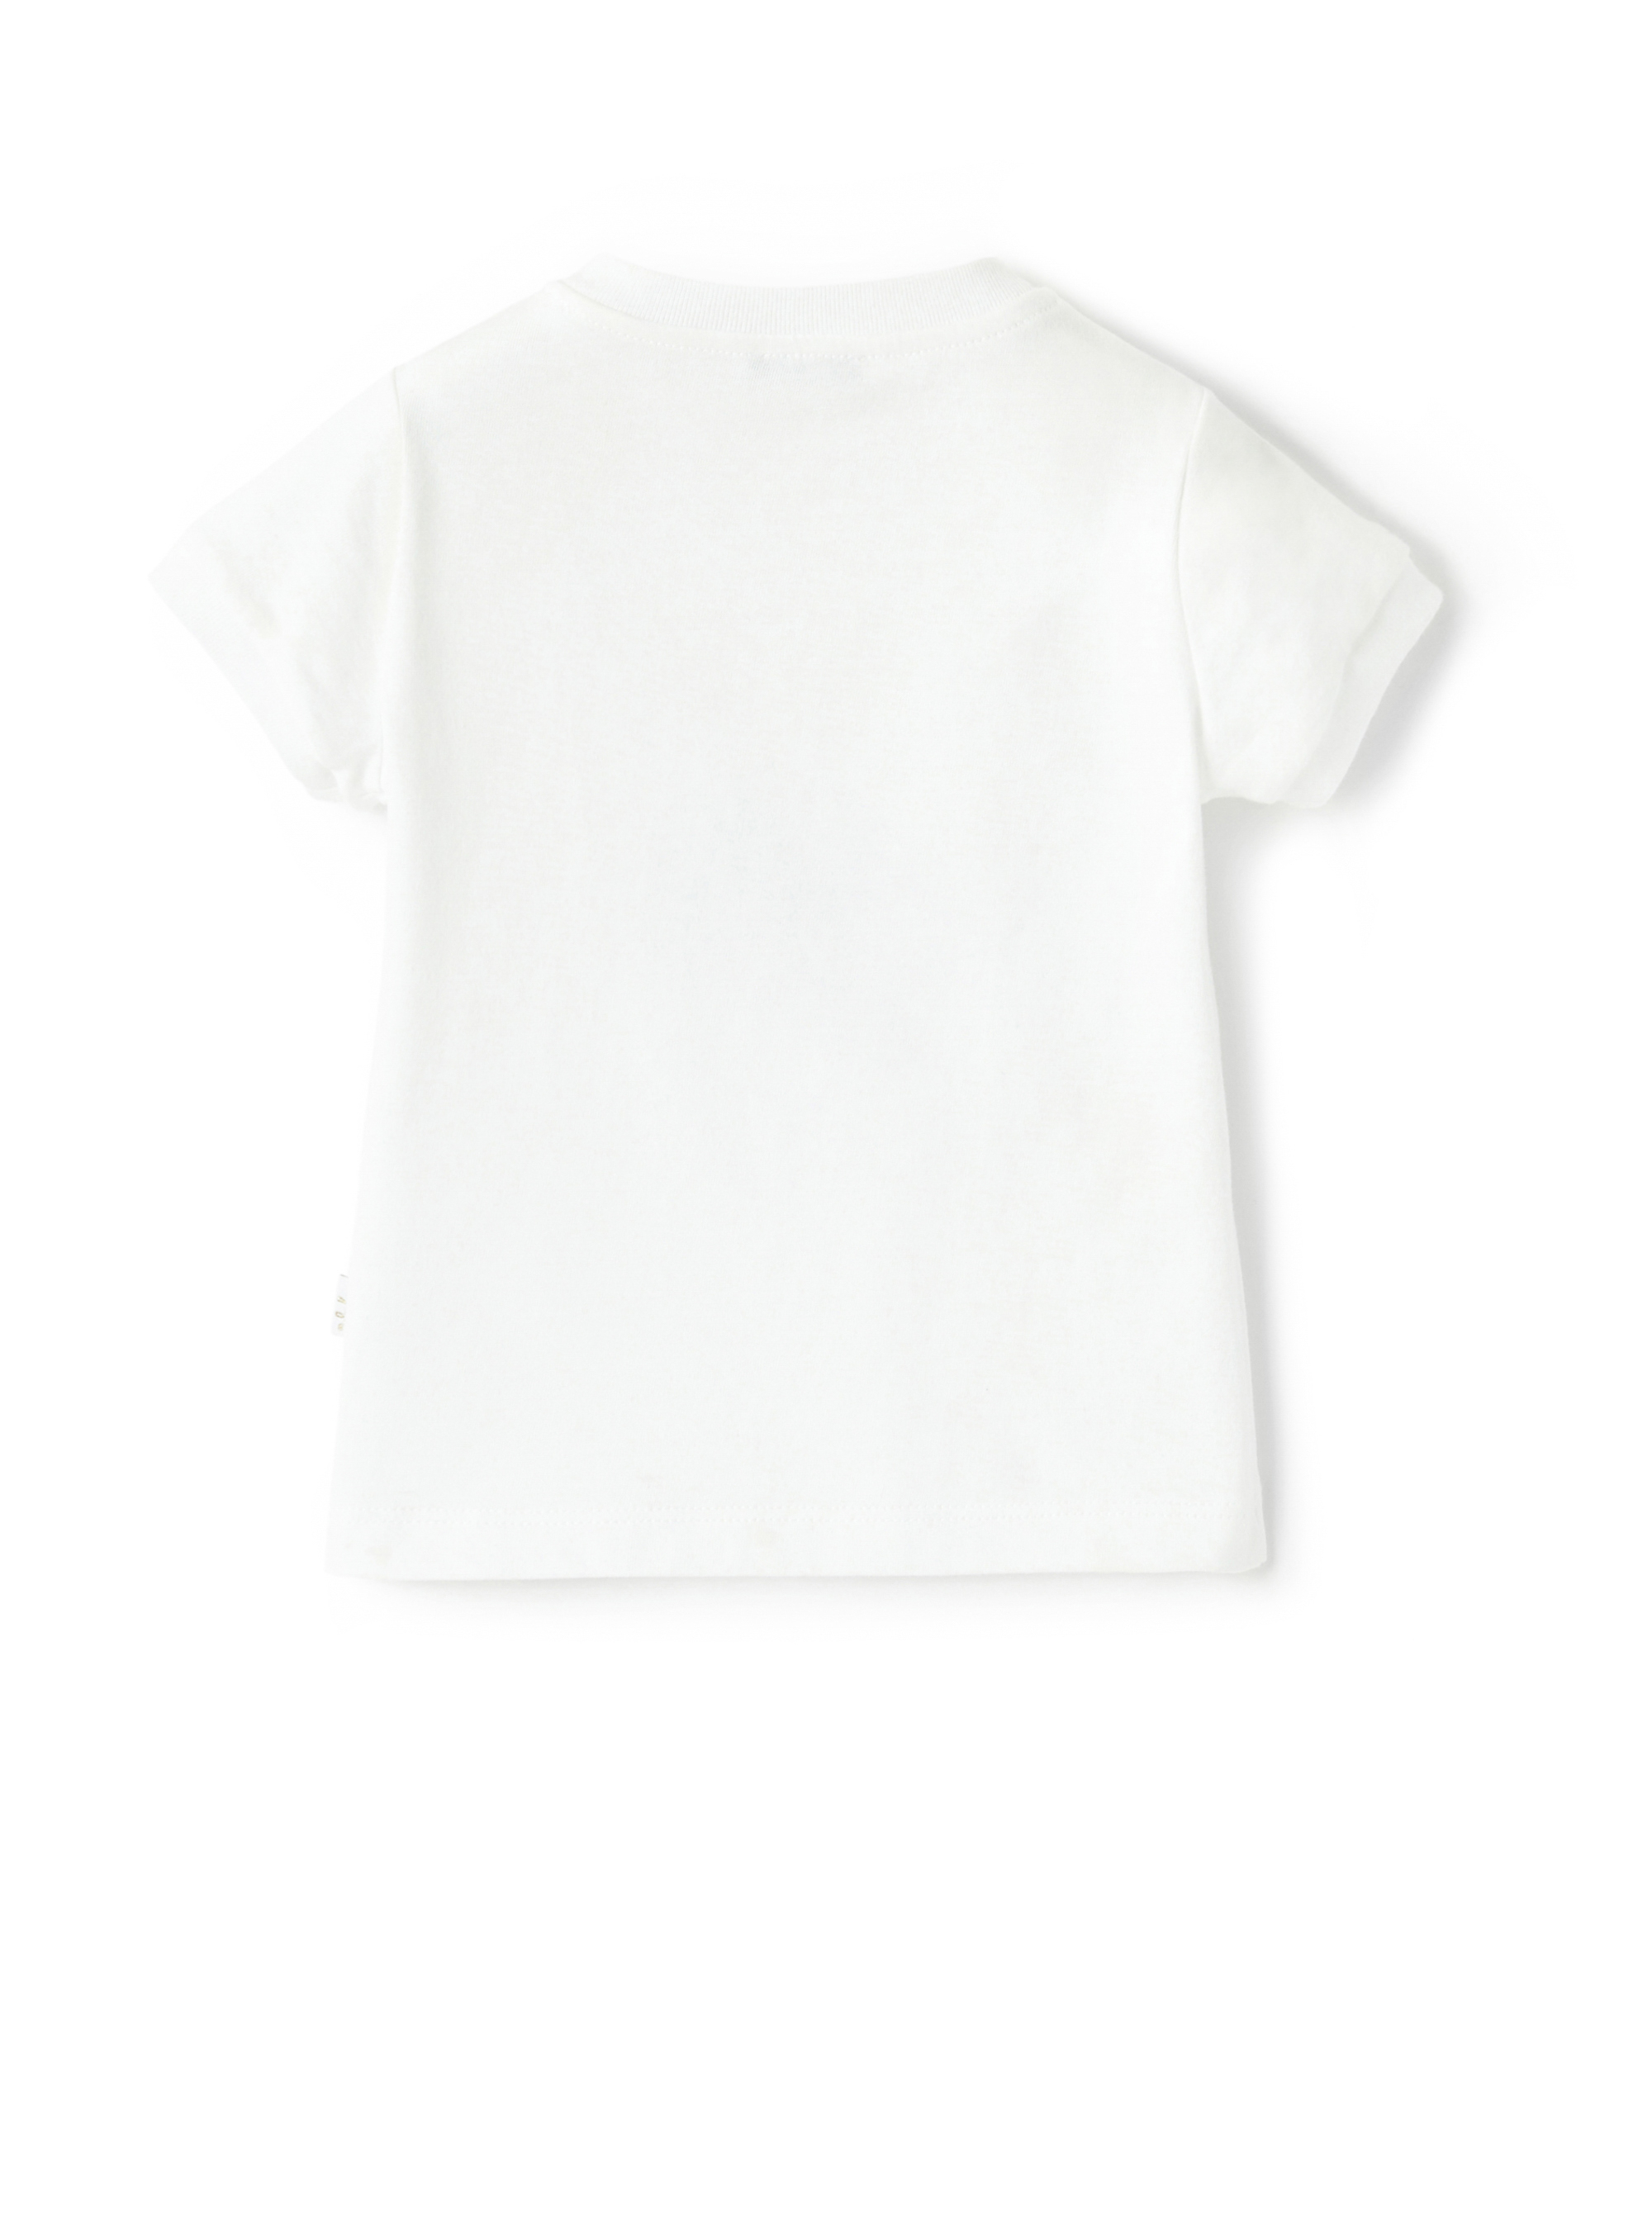 T-shirt with puppy and application - White | Il Gufo